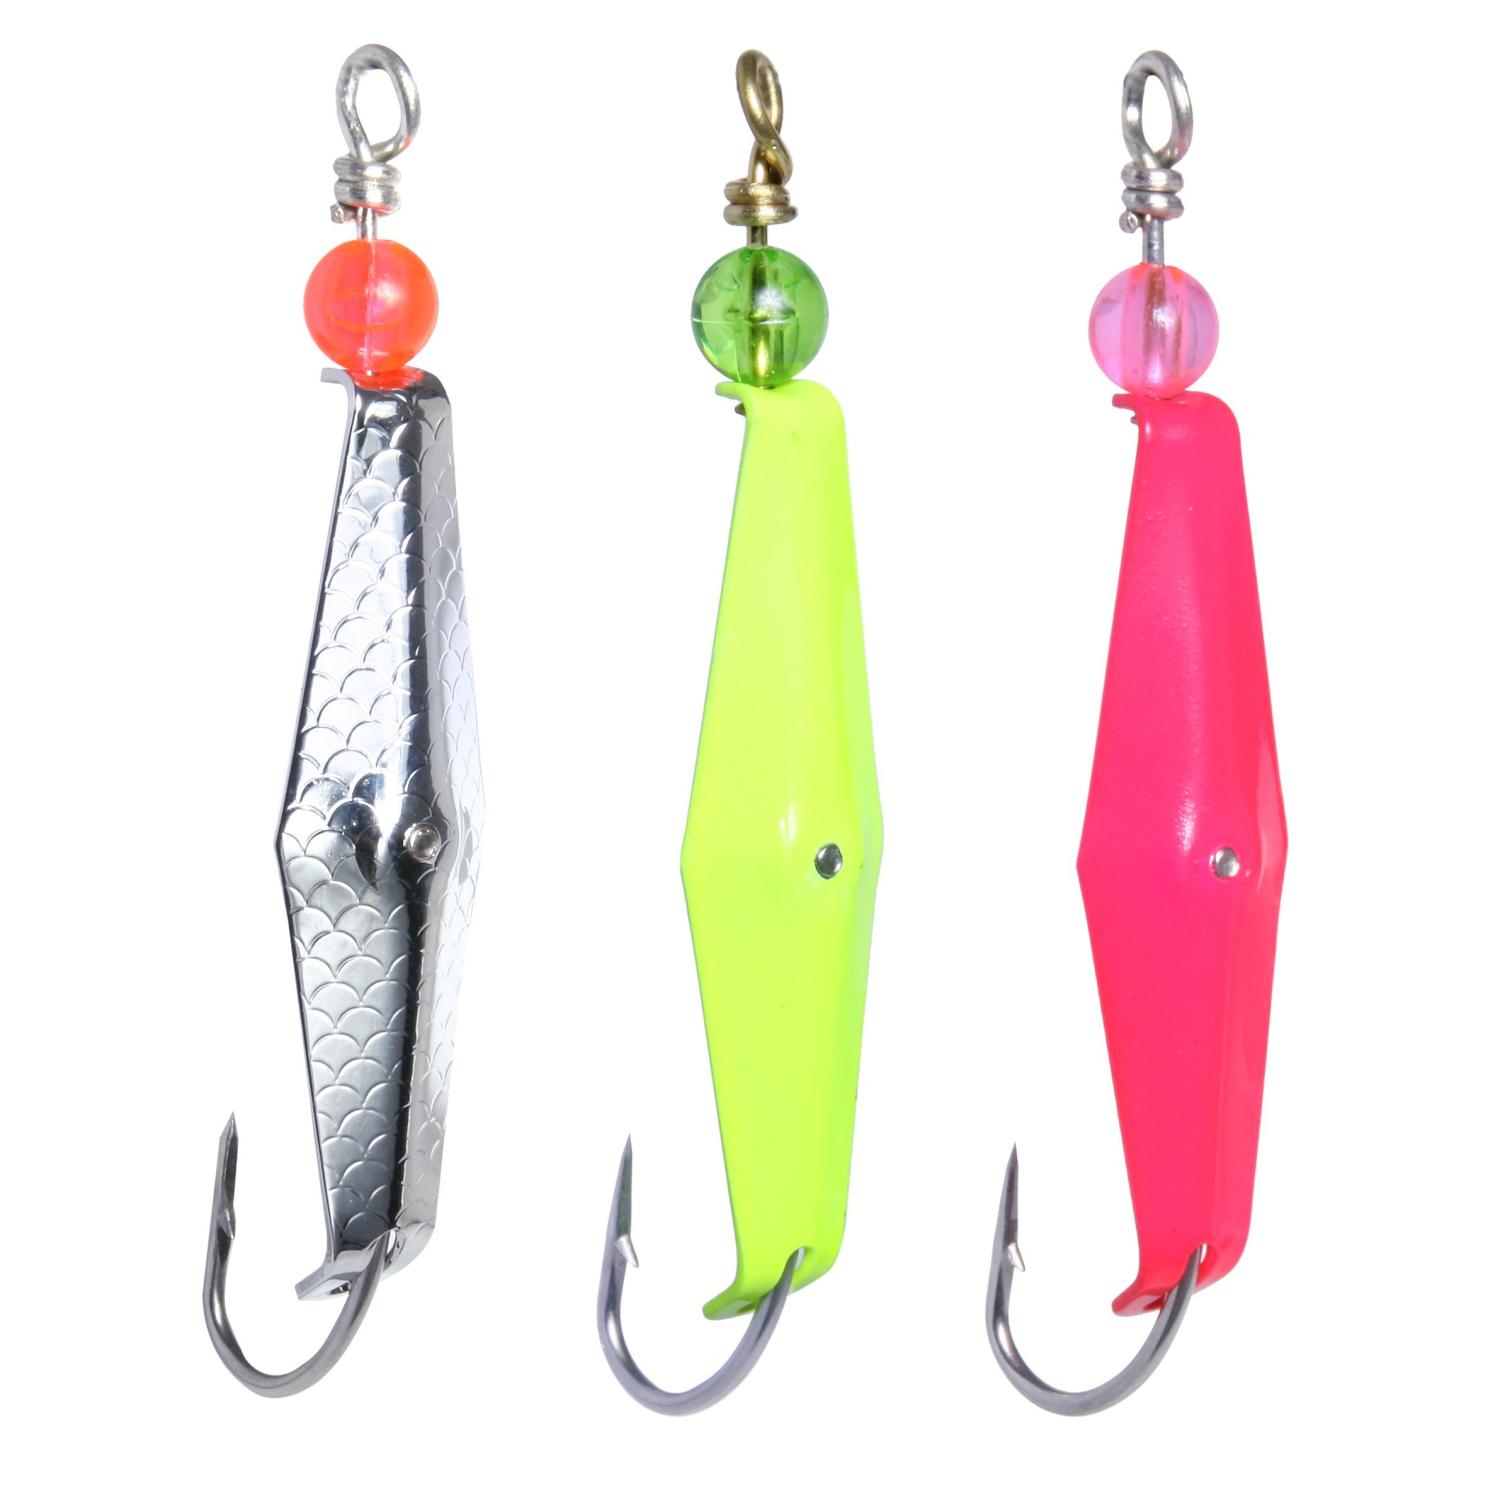 Clark Spoon Size 0, One Chrome Hammered Scale Finish, One Chartreuse, One  Pink, 3 Pack